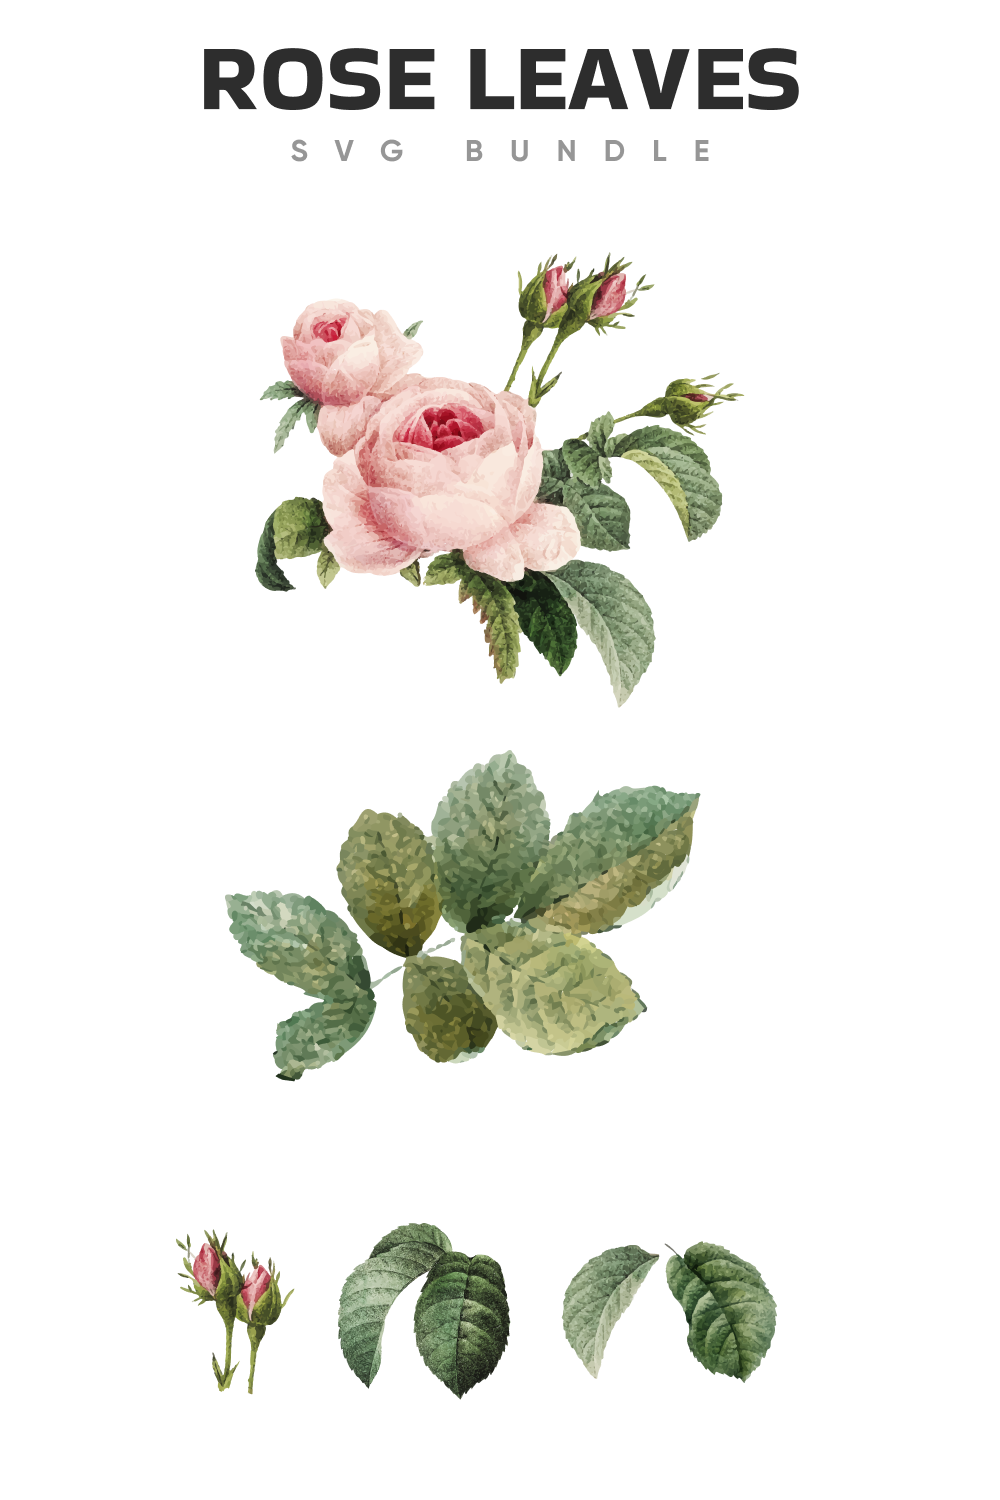 Some types of the leaves and pretty roses.